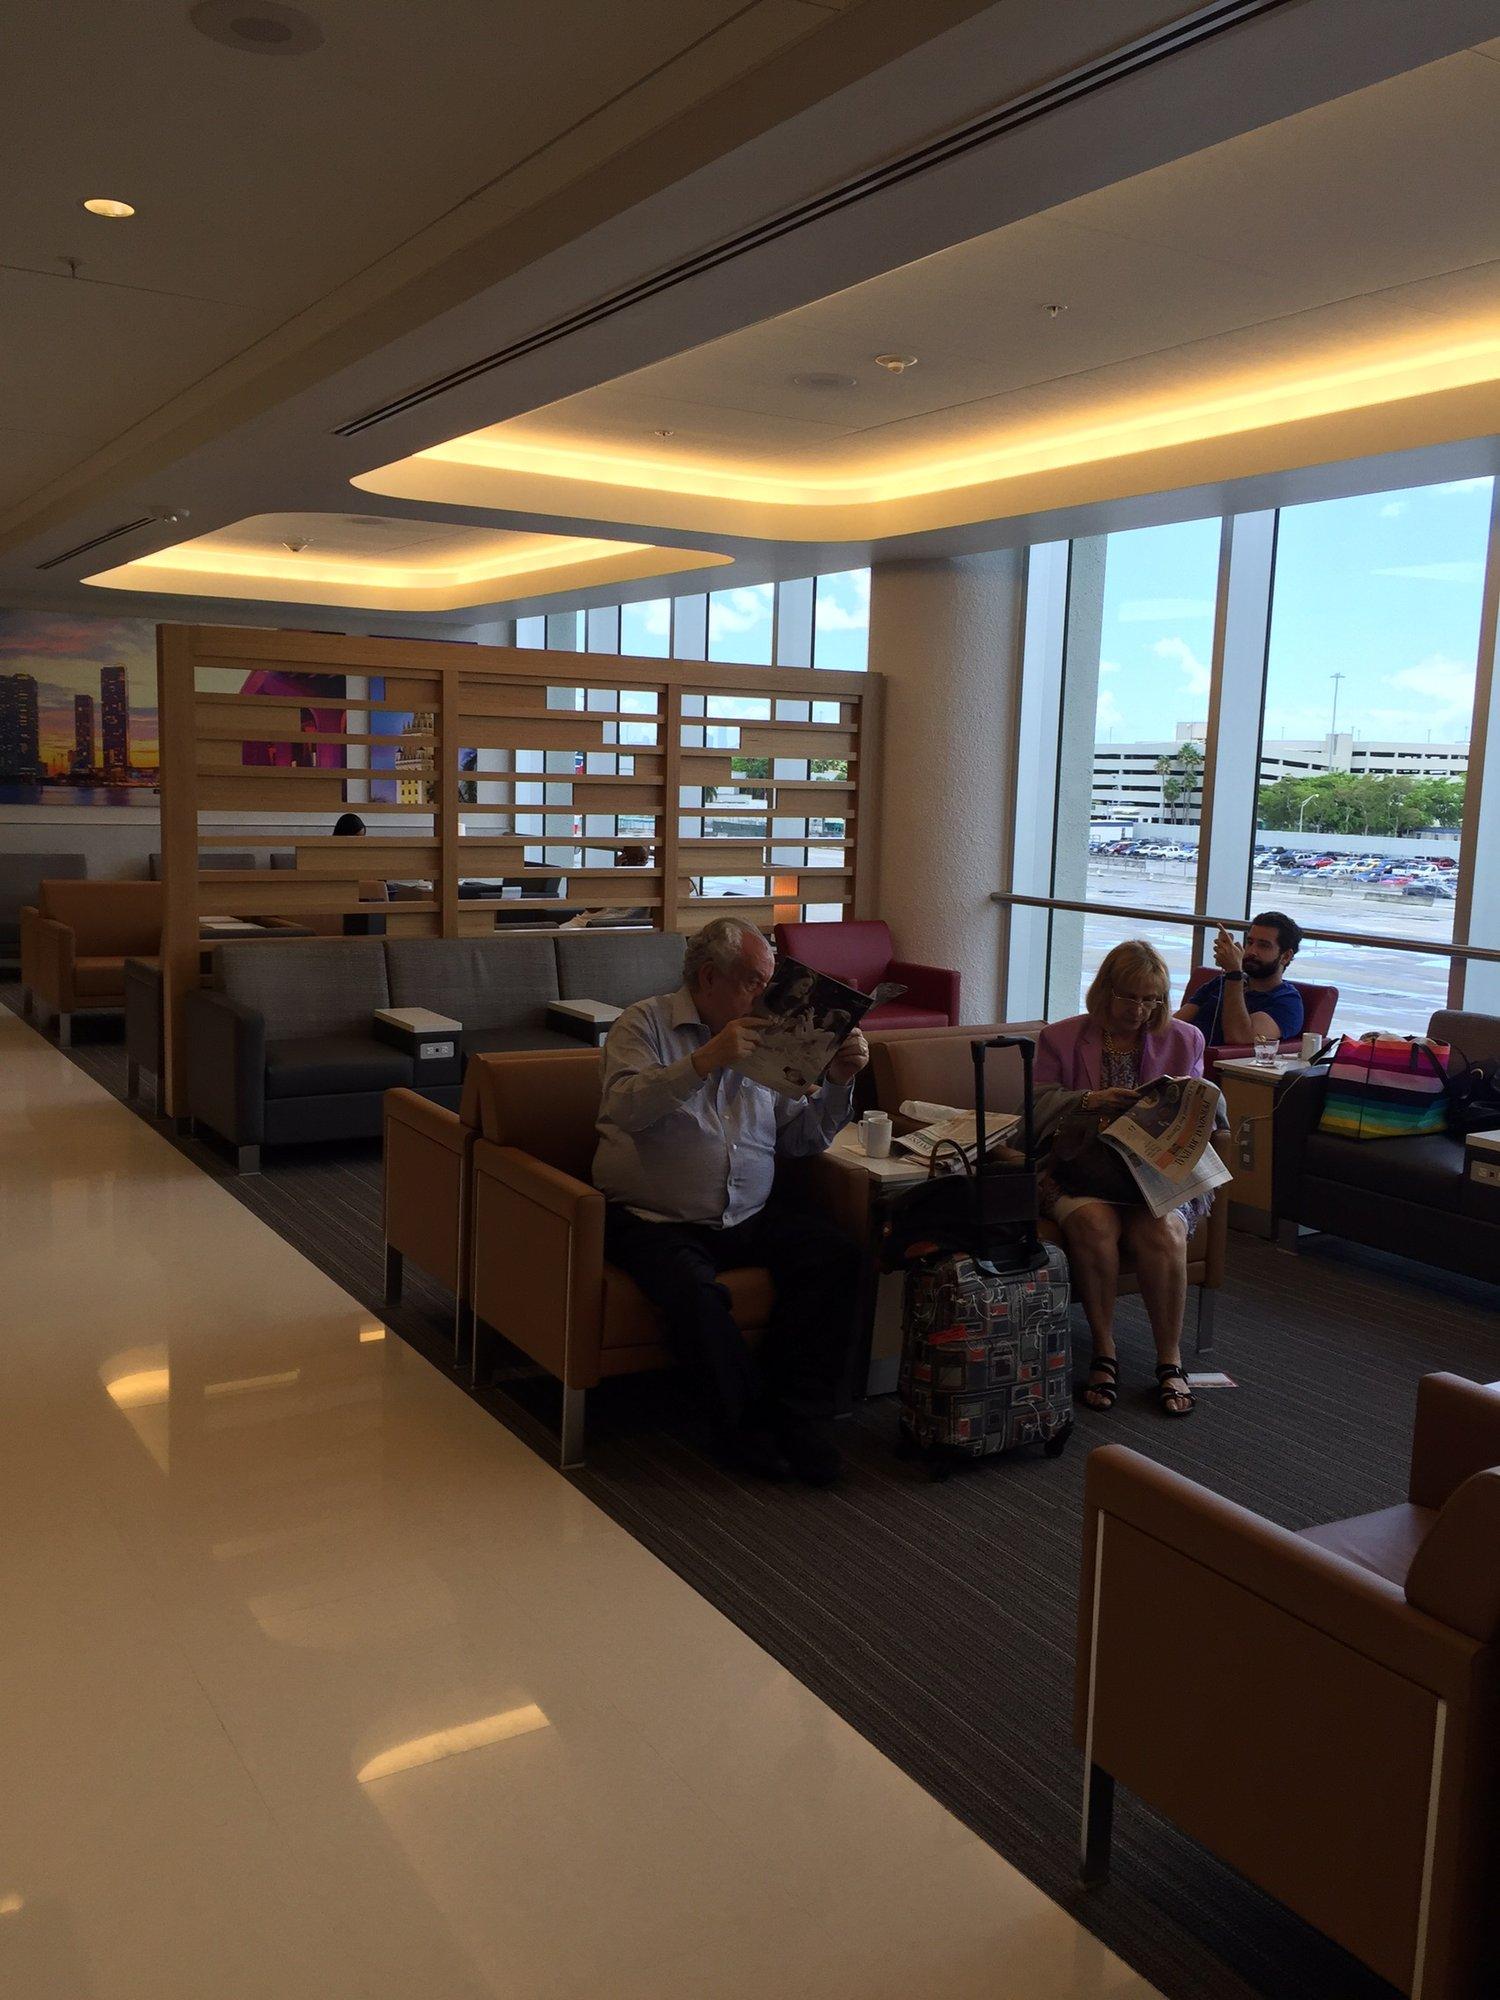 American Airlines Admirals Club (Gate D15) image 16 of 25